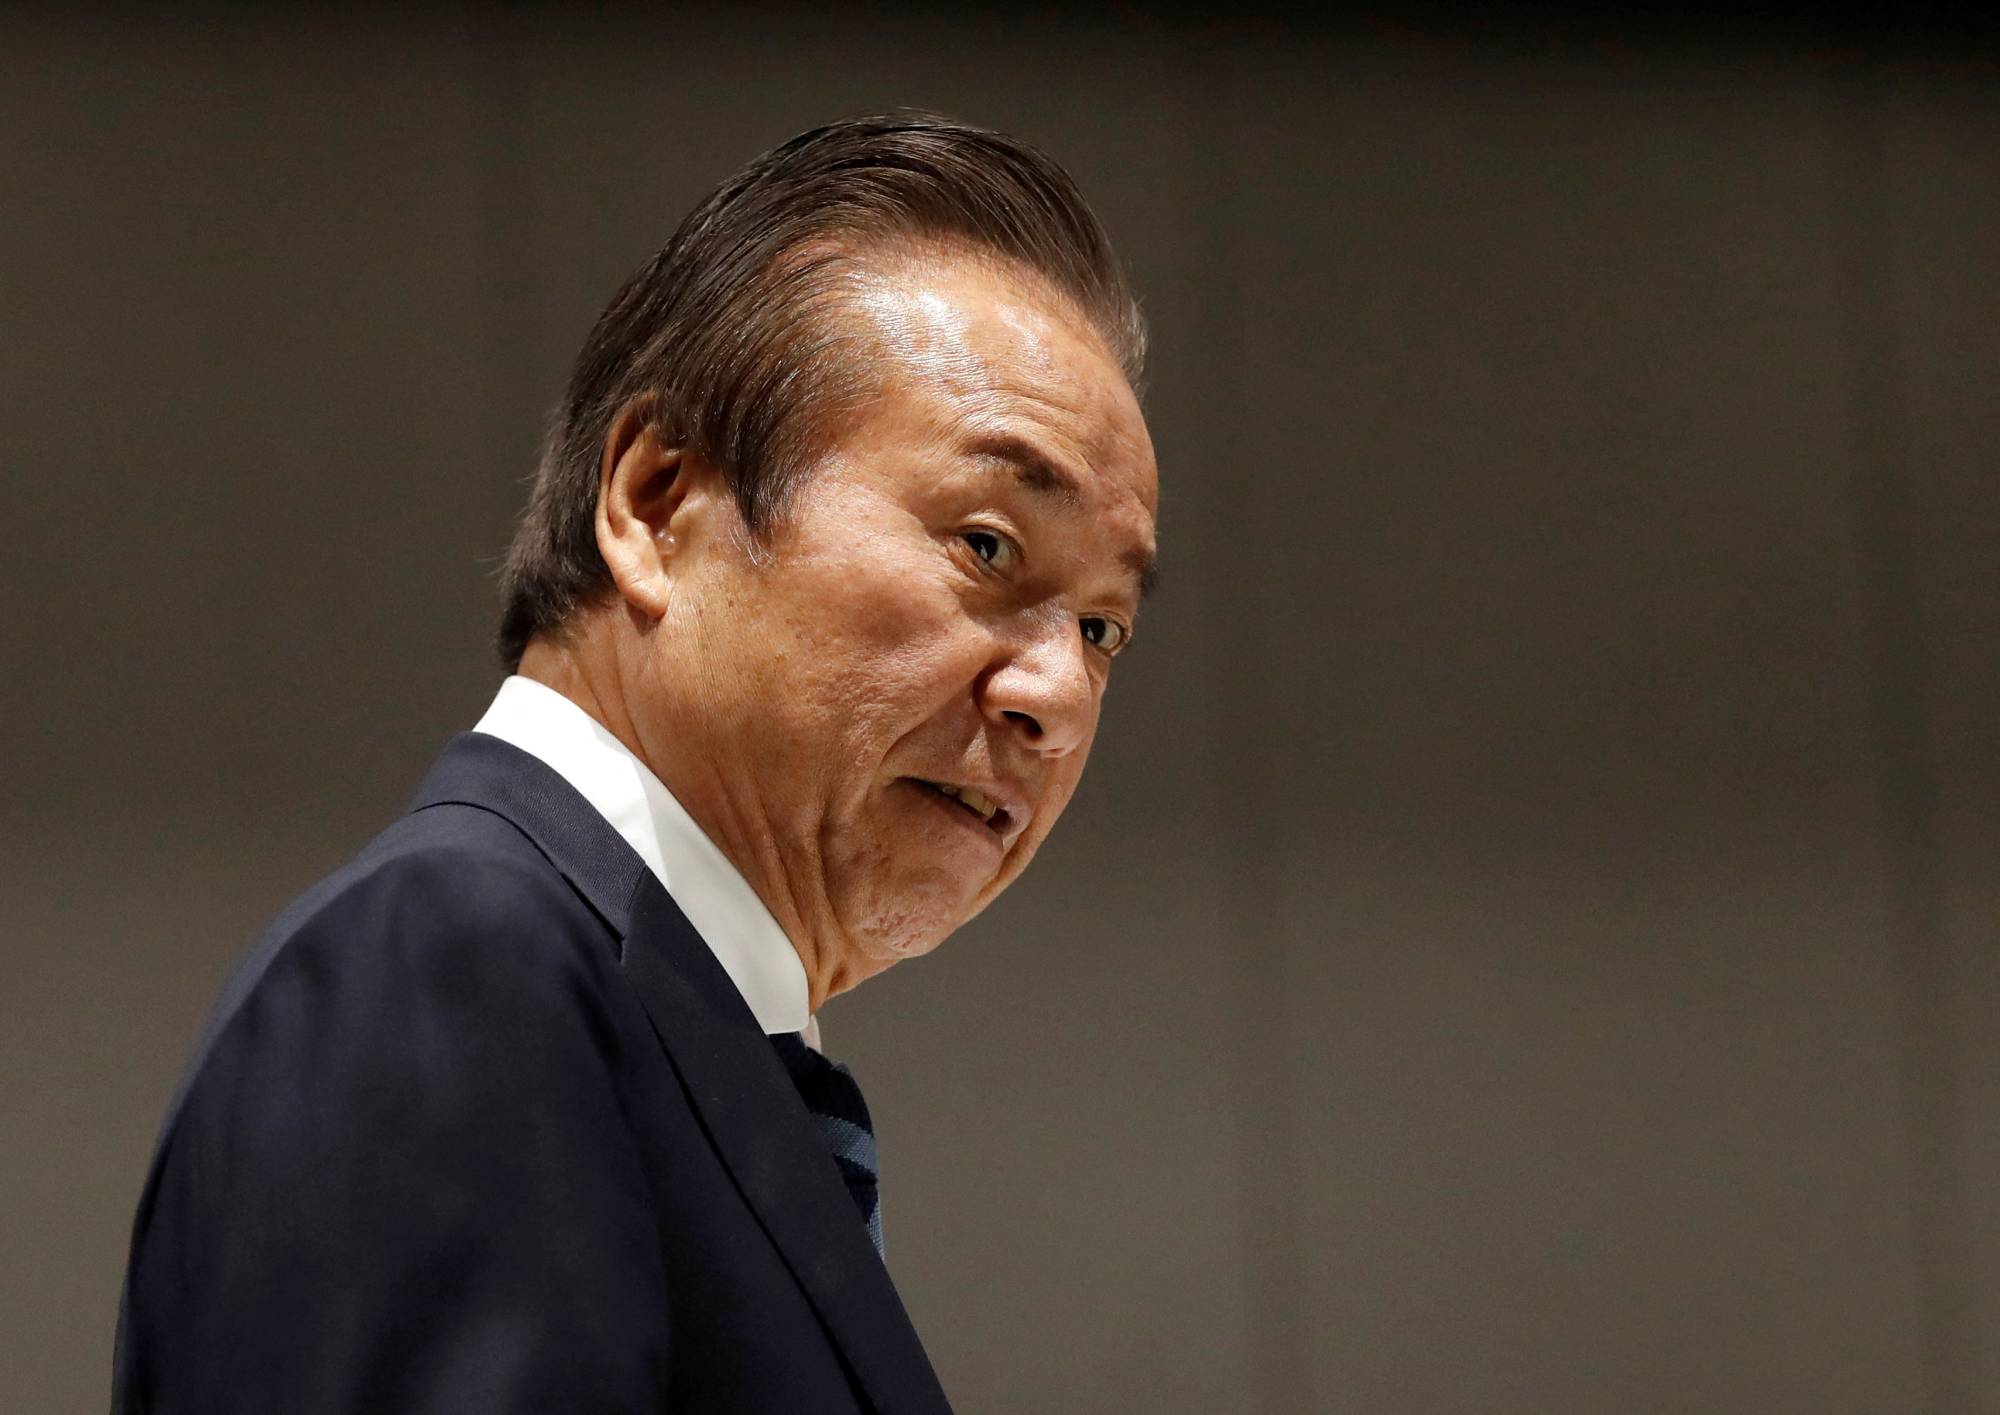 Then-Tokyo Organising Committee board member Haruyuki Takahashi arrives for a Games executive board meeting in Tokyo in March 2020. | POOL / VIA REUTERS